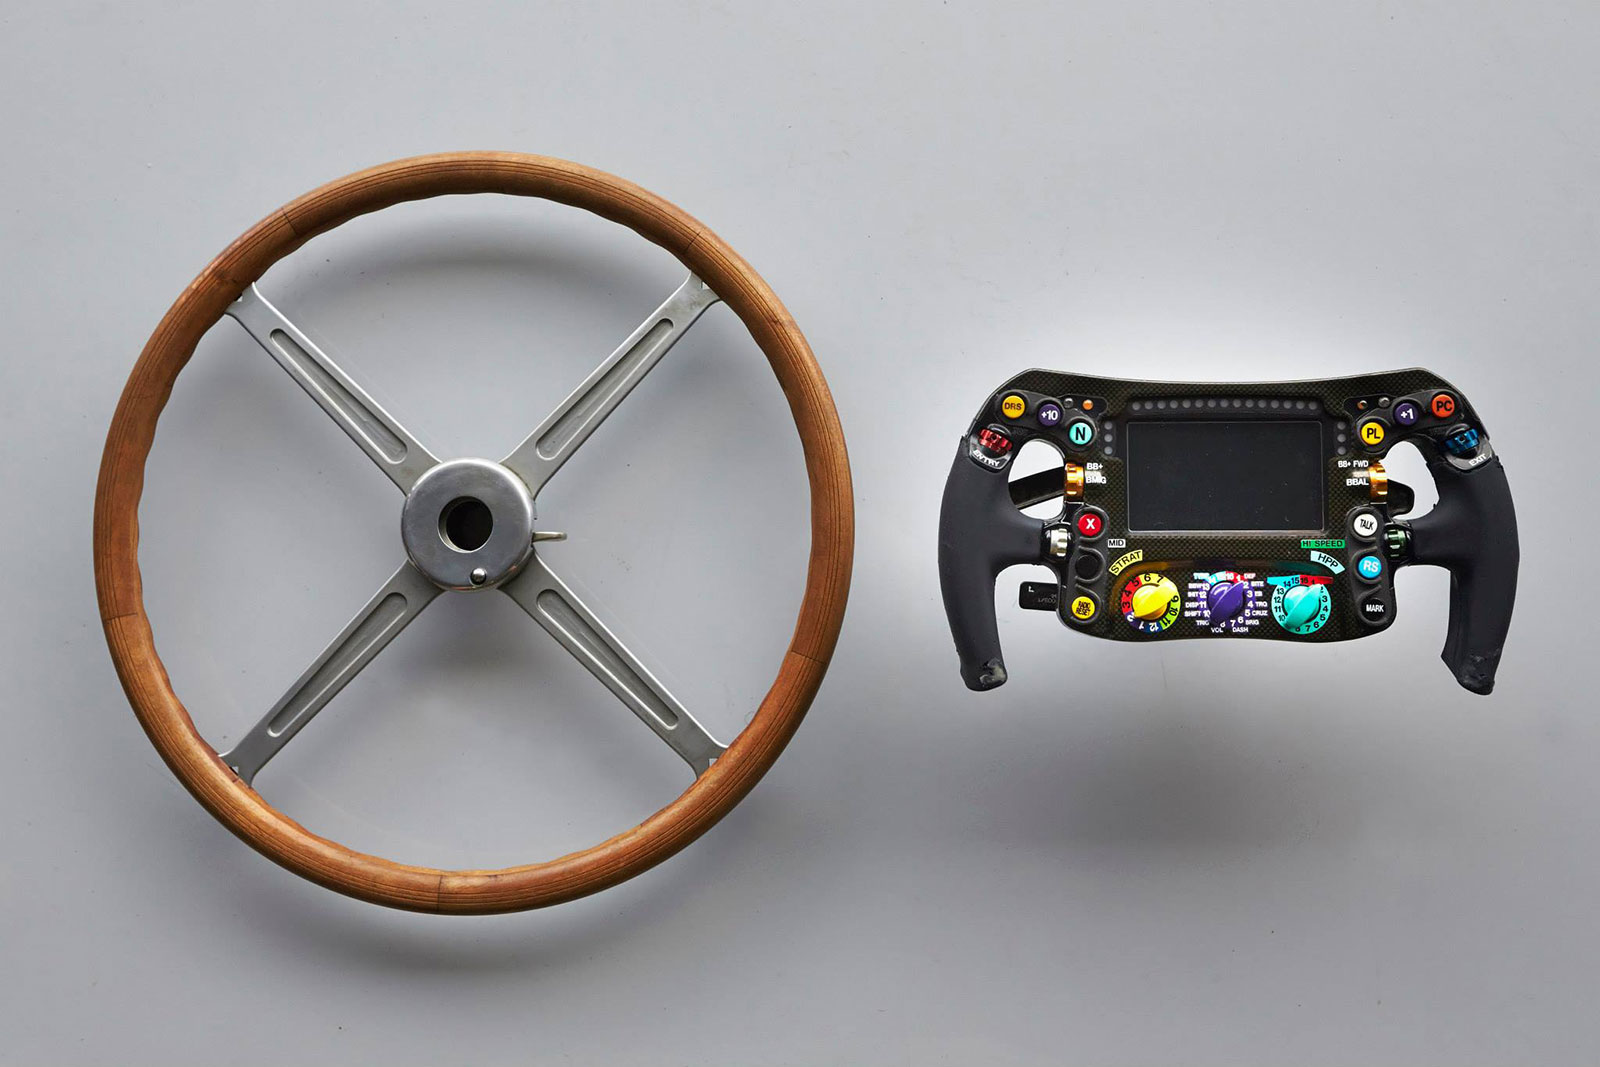 Mercedes F1 steering wheels from 1954 and 2014